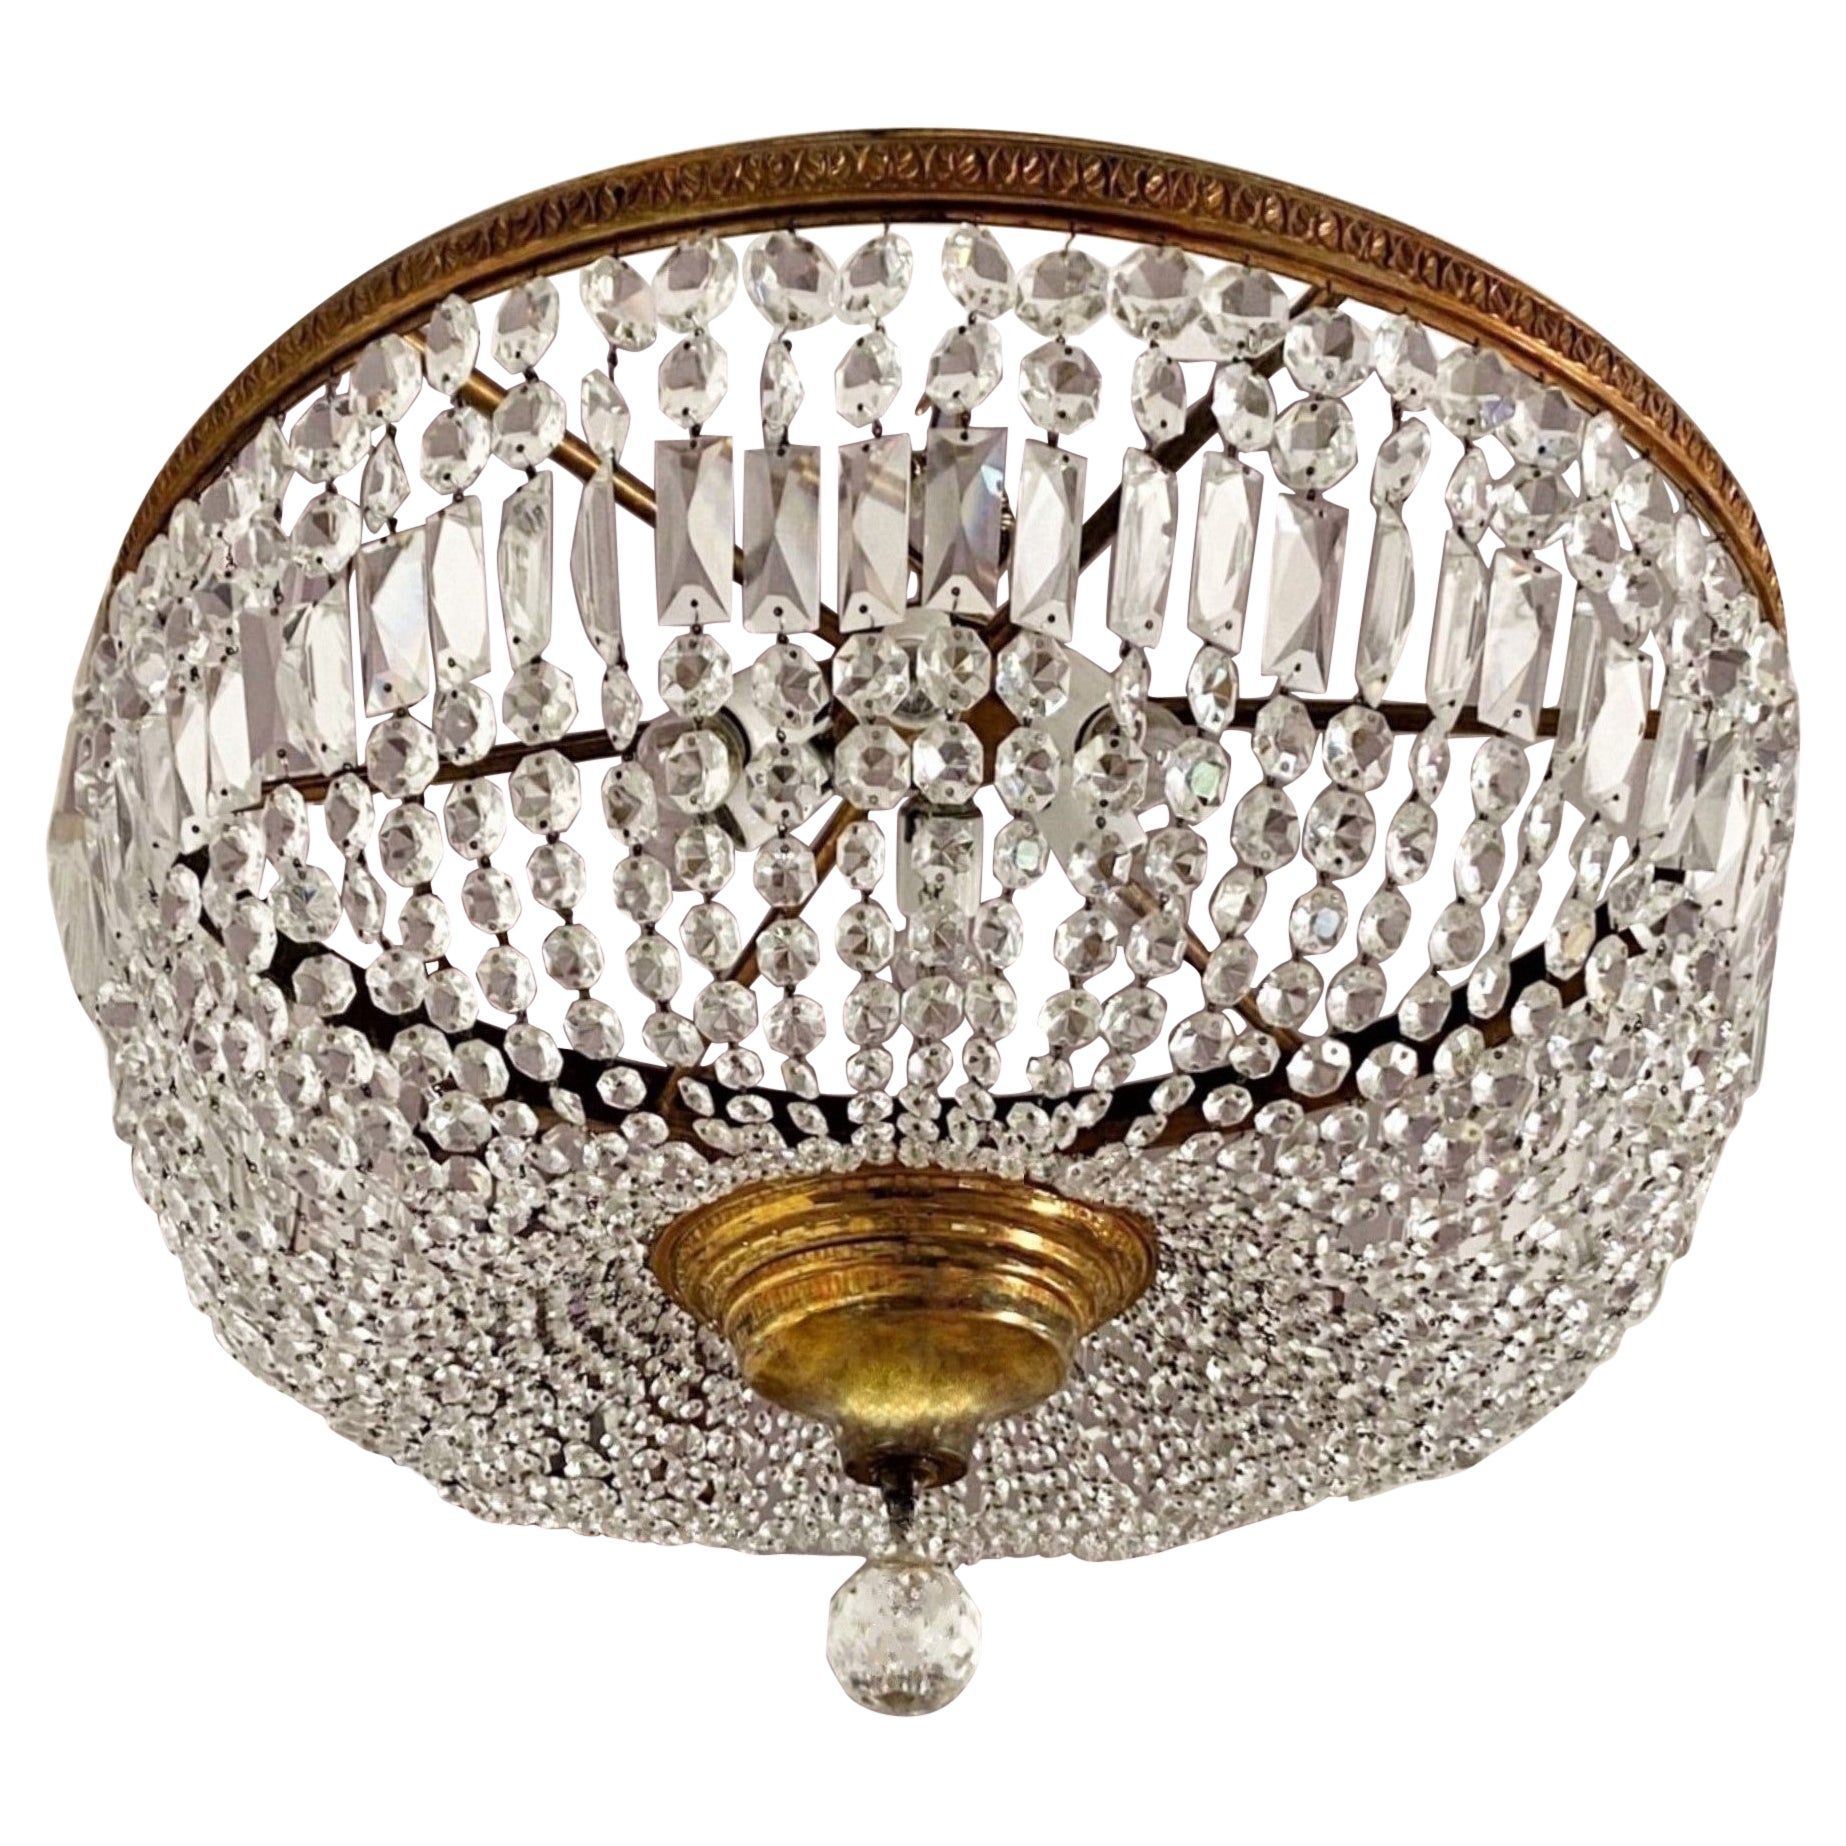 1950s Monumental French Art Deco Faceted Crystal Bronze Flush Mount, Chandelier